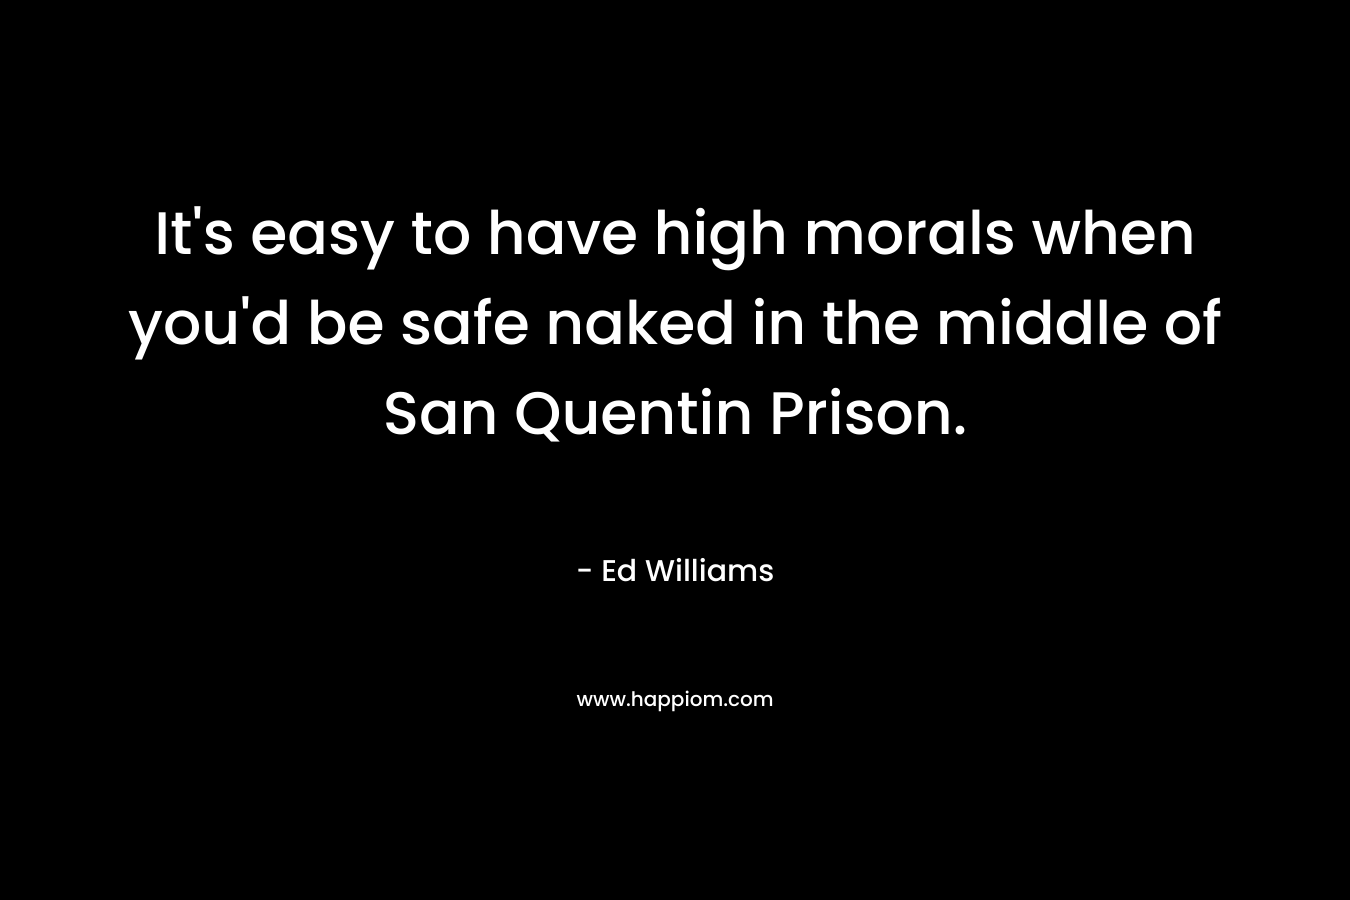 It’s easy to have high morals when you’d be safe naked in the middle of San Quentin Prison. – Ed Williams